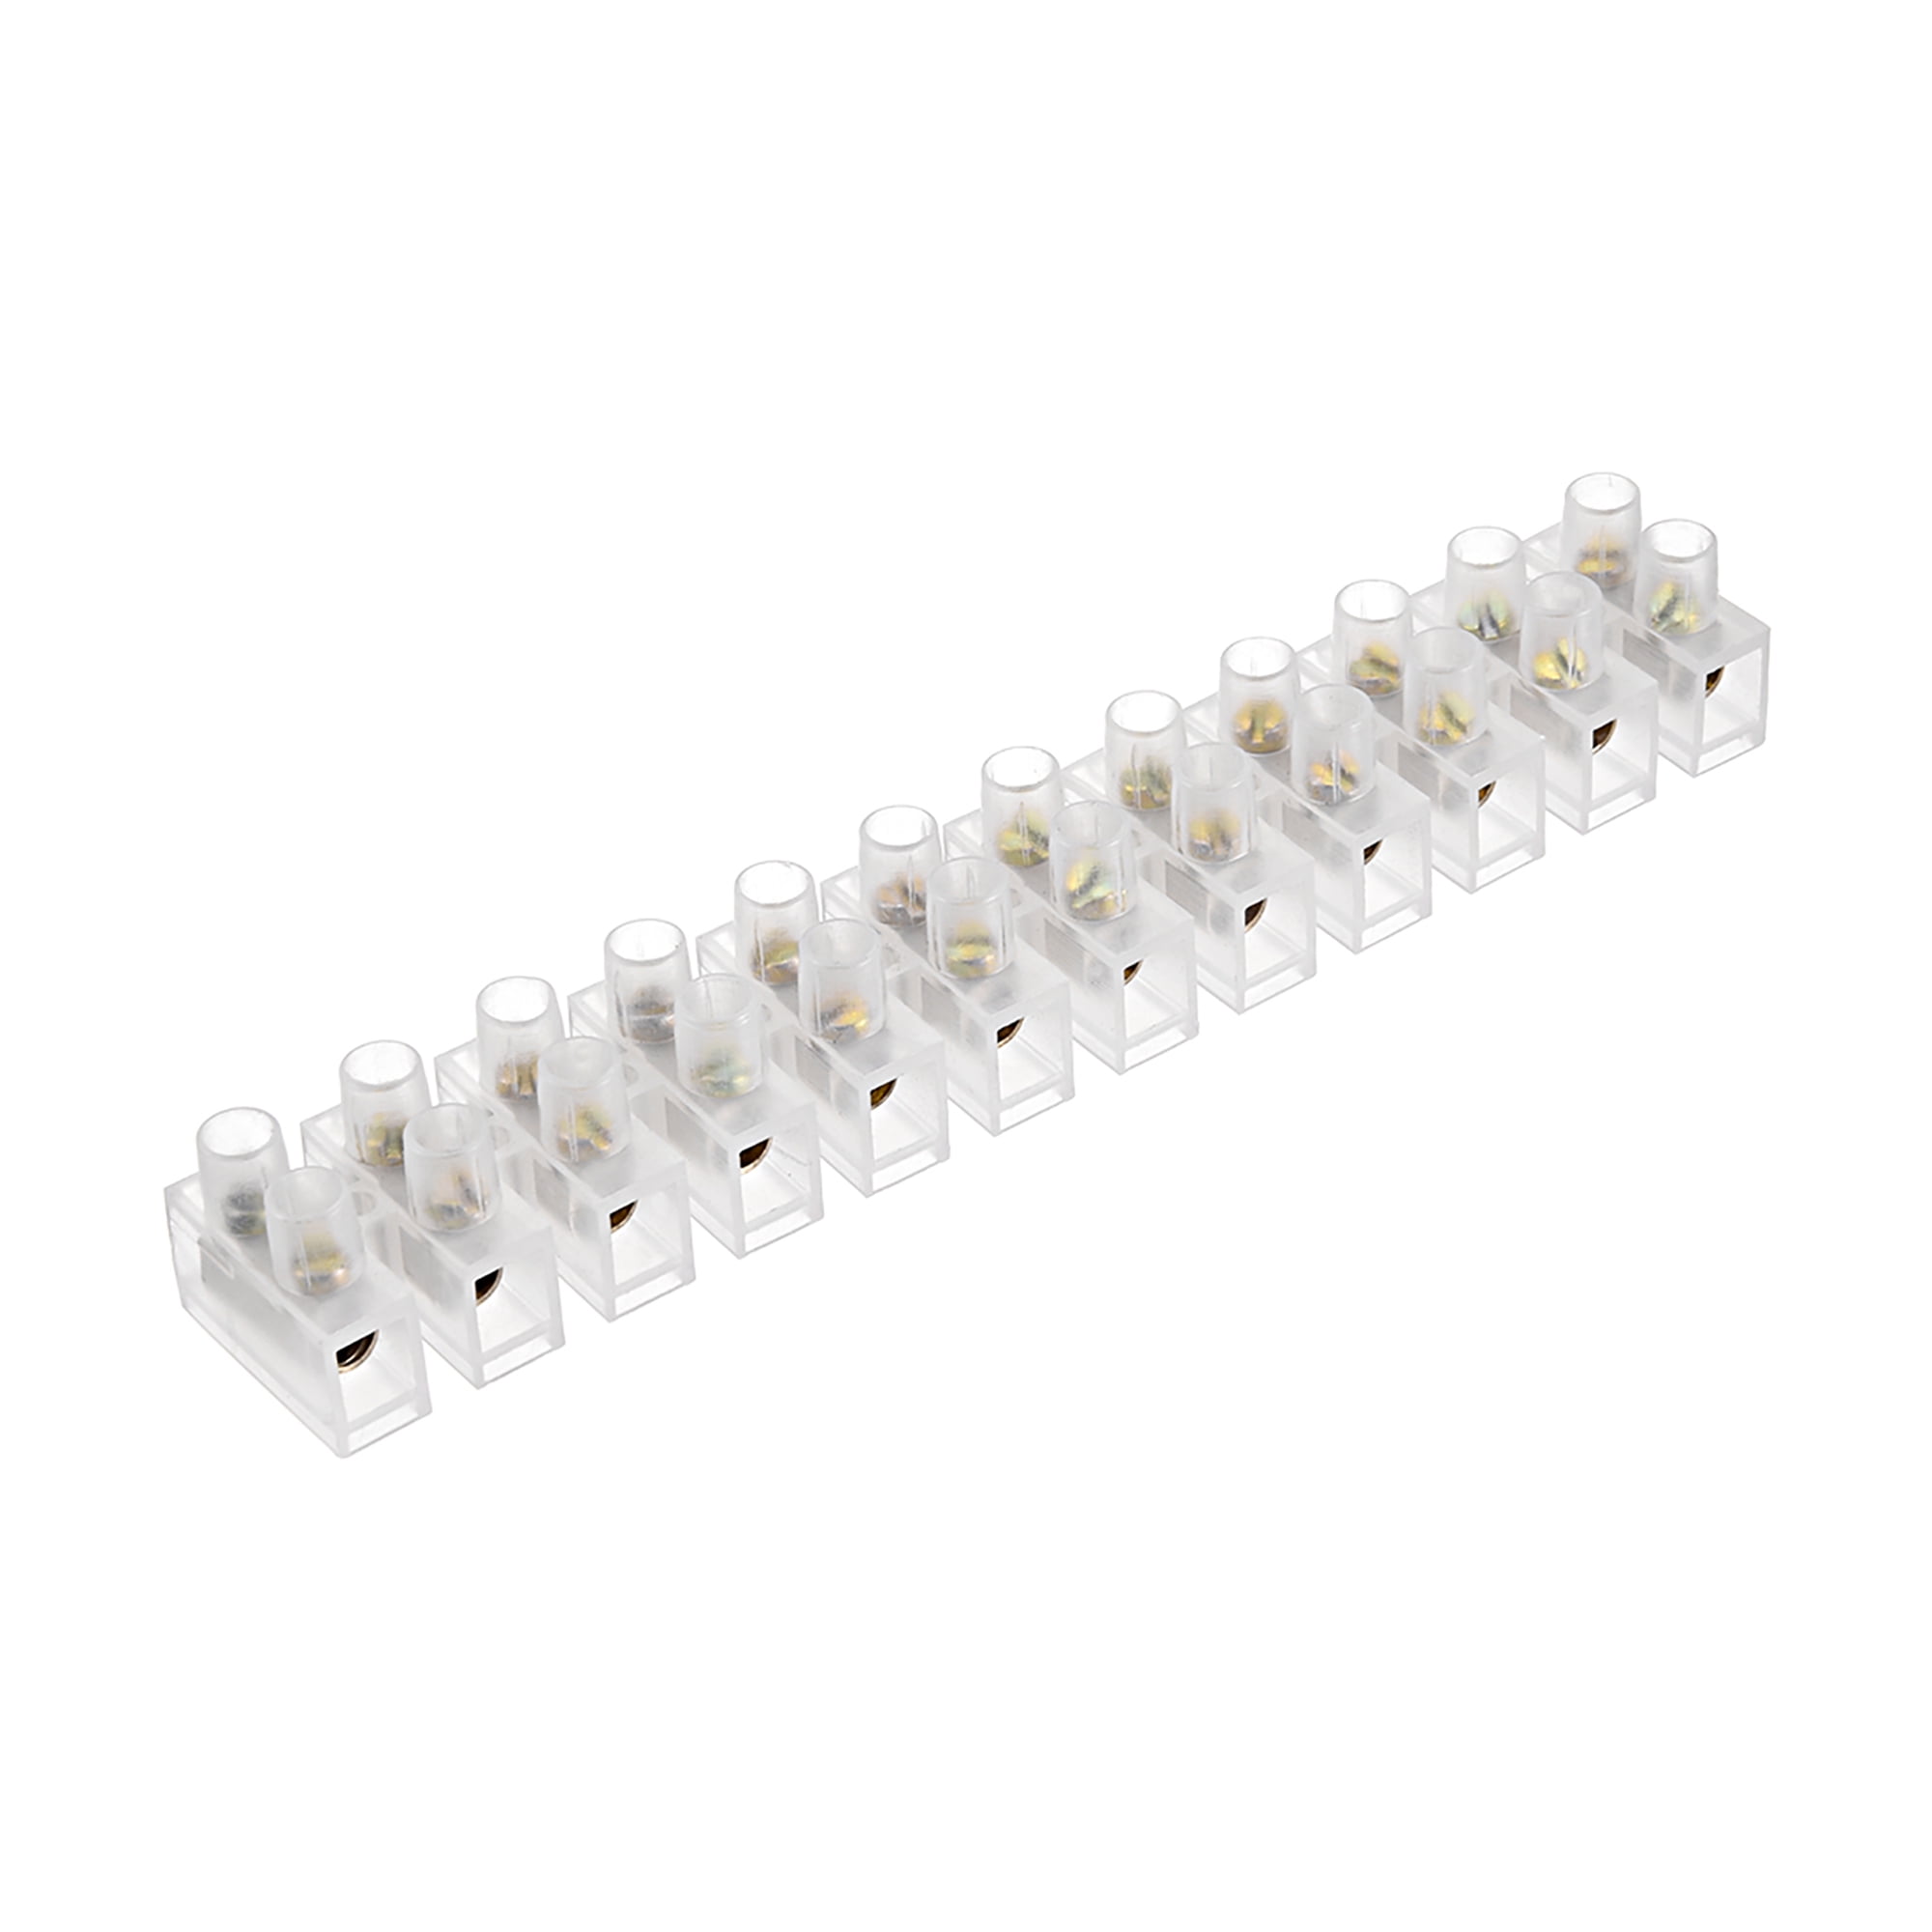 uxcell Terminal Strip Screw Terminal Barrier Block 10A 12 Position Dual Row Type U Wire Connector 4pcs